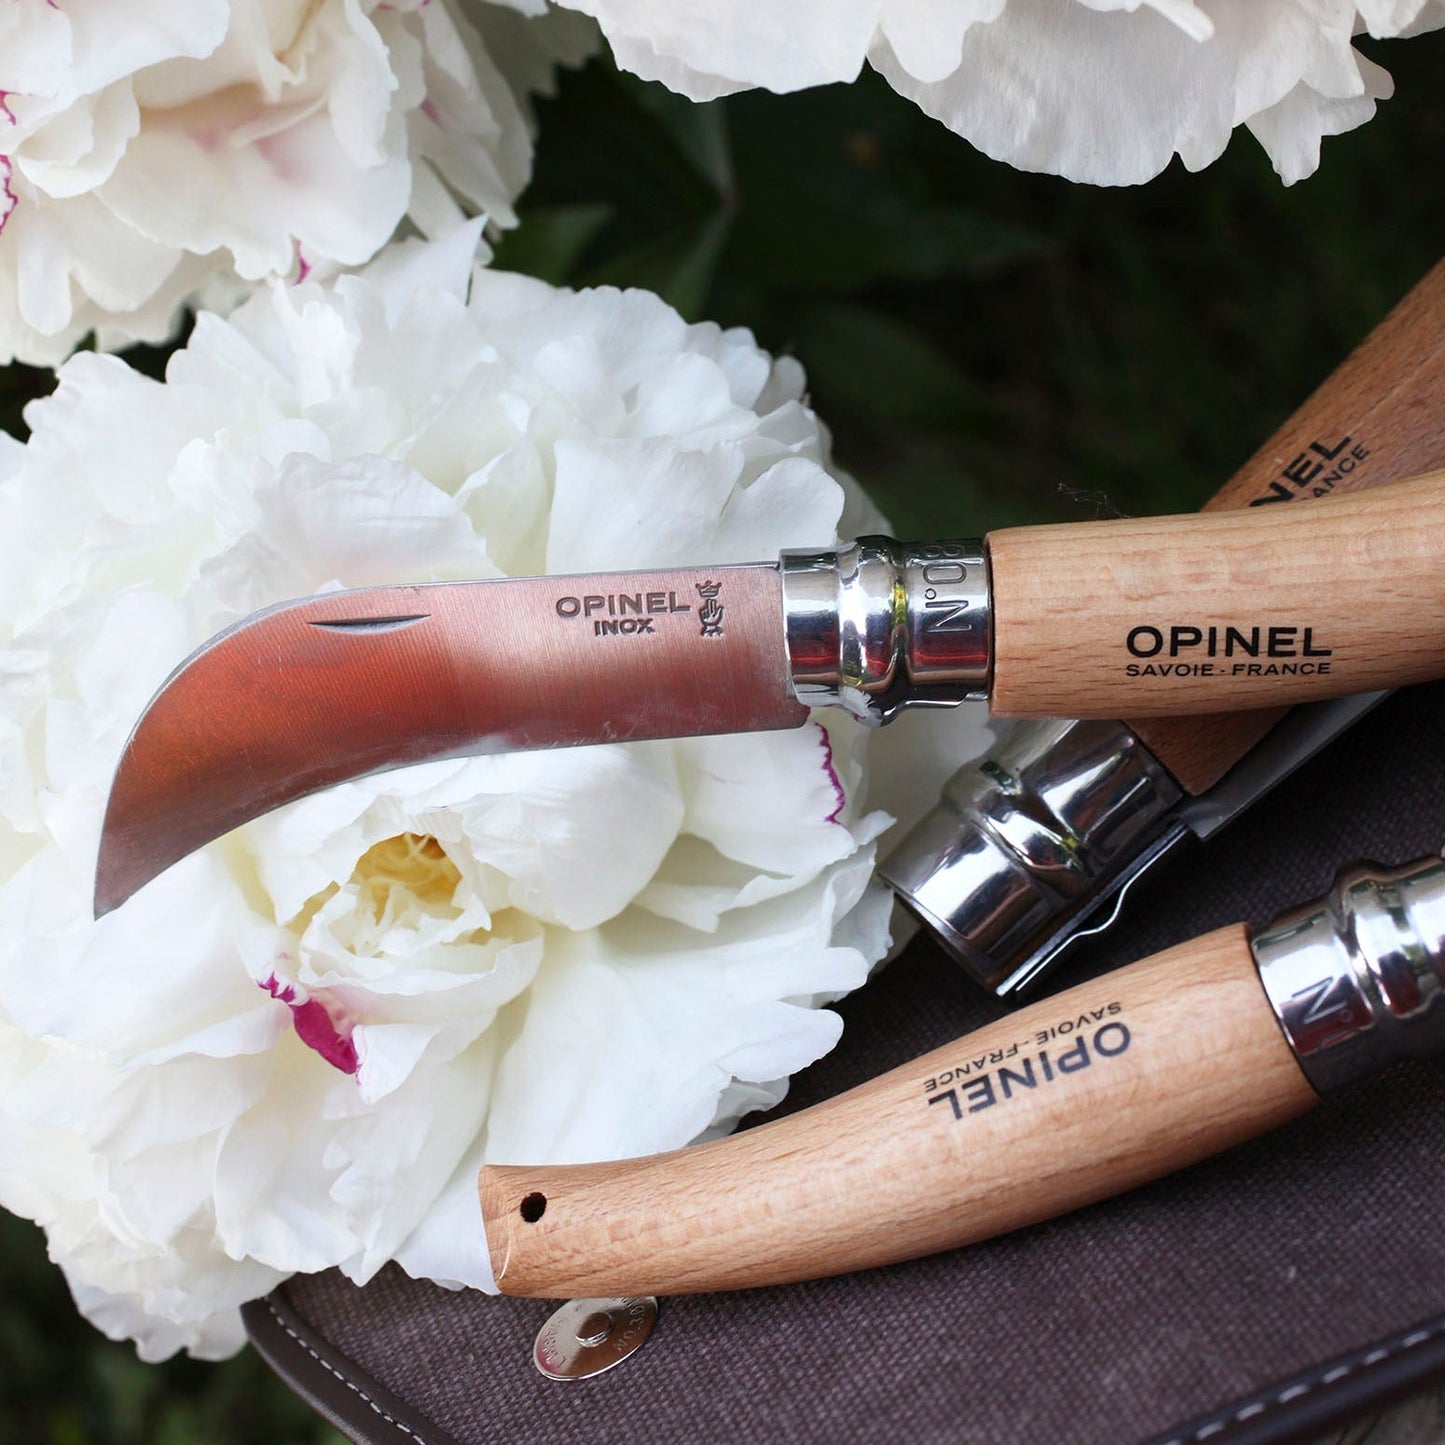 Opinel No.8 Pruning & Grafting 3.25" Stainless Folding Knife - Made in France